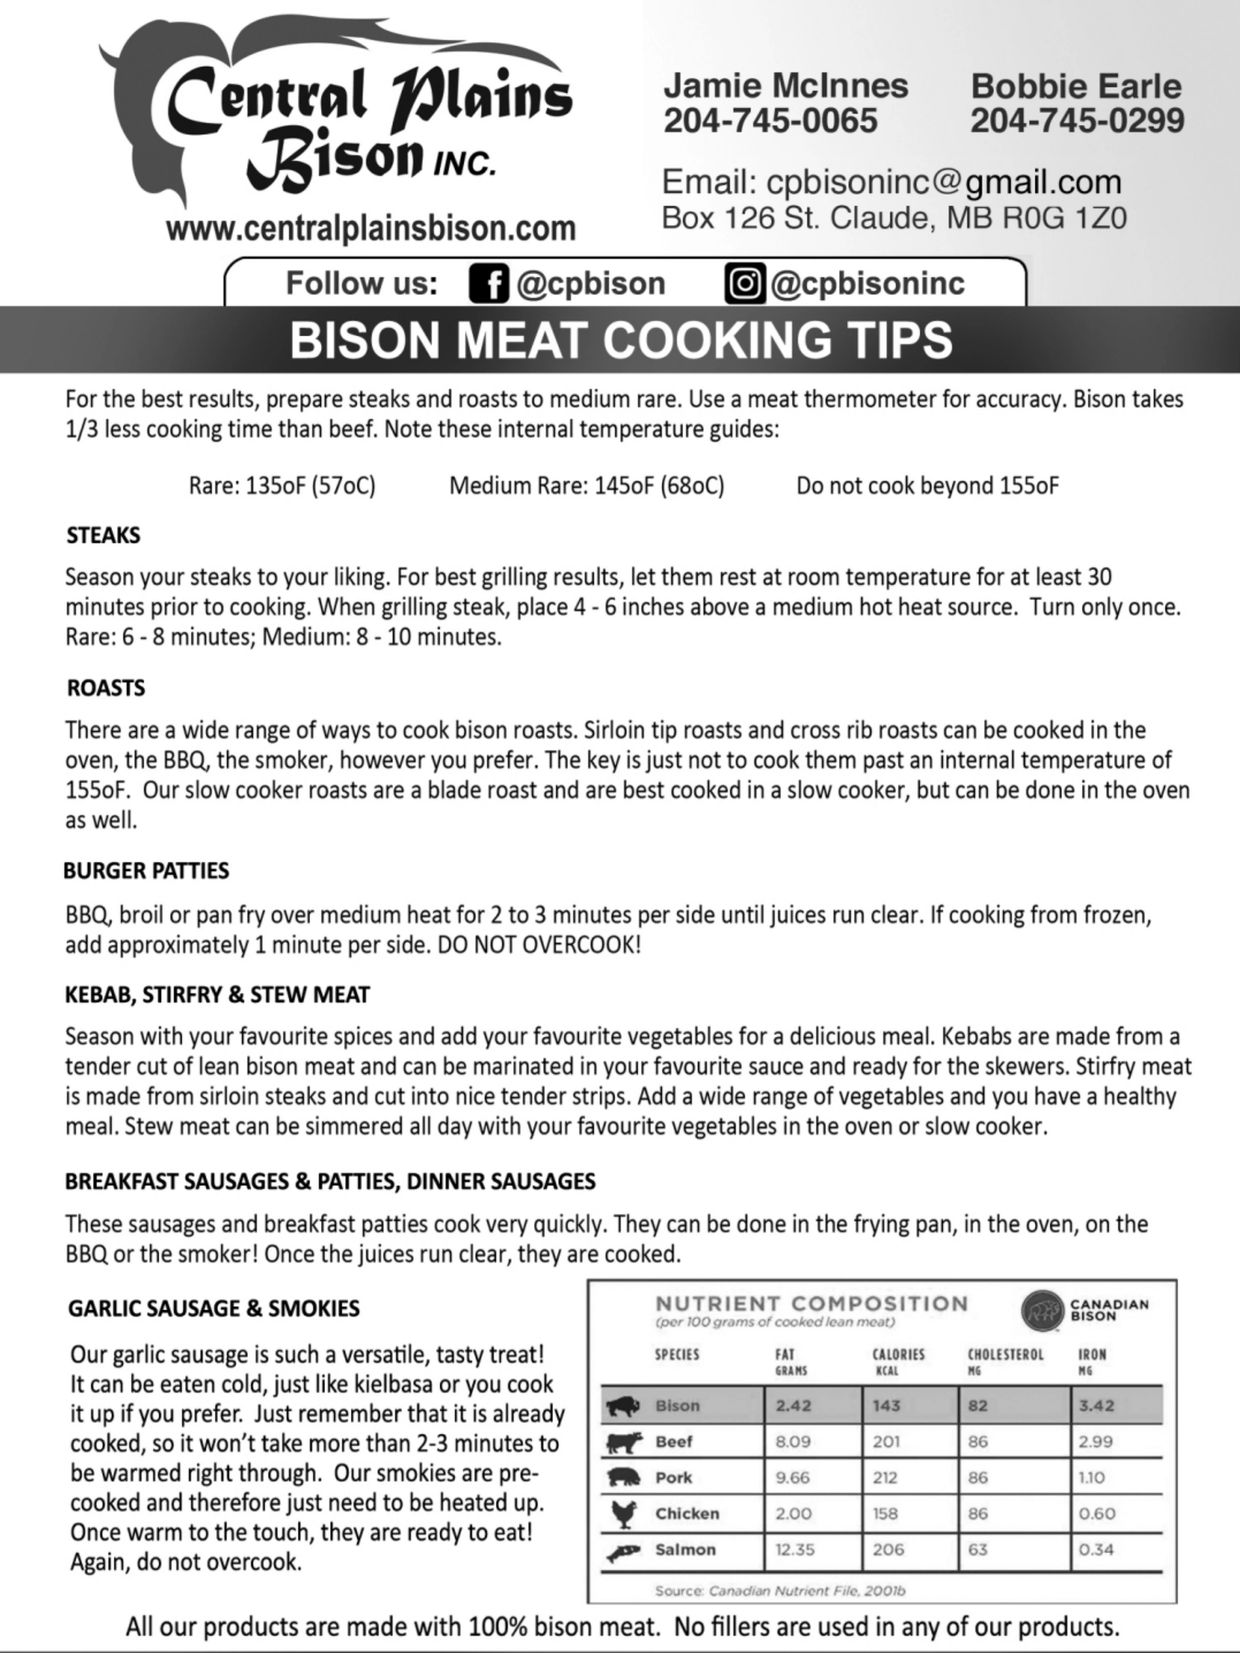 Bison Meat Cooking Tips